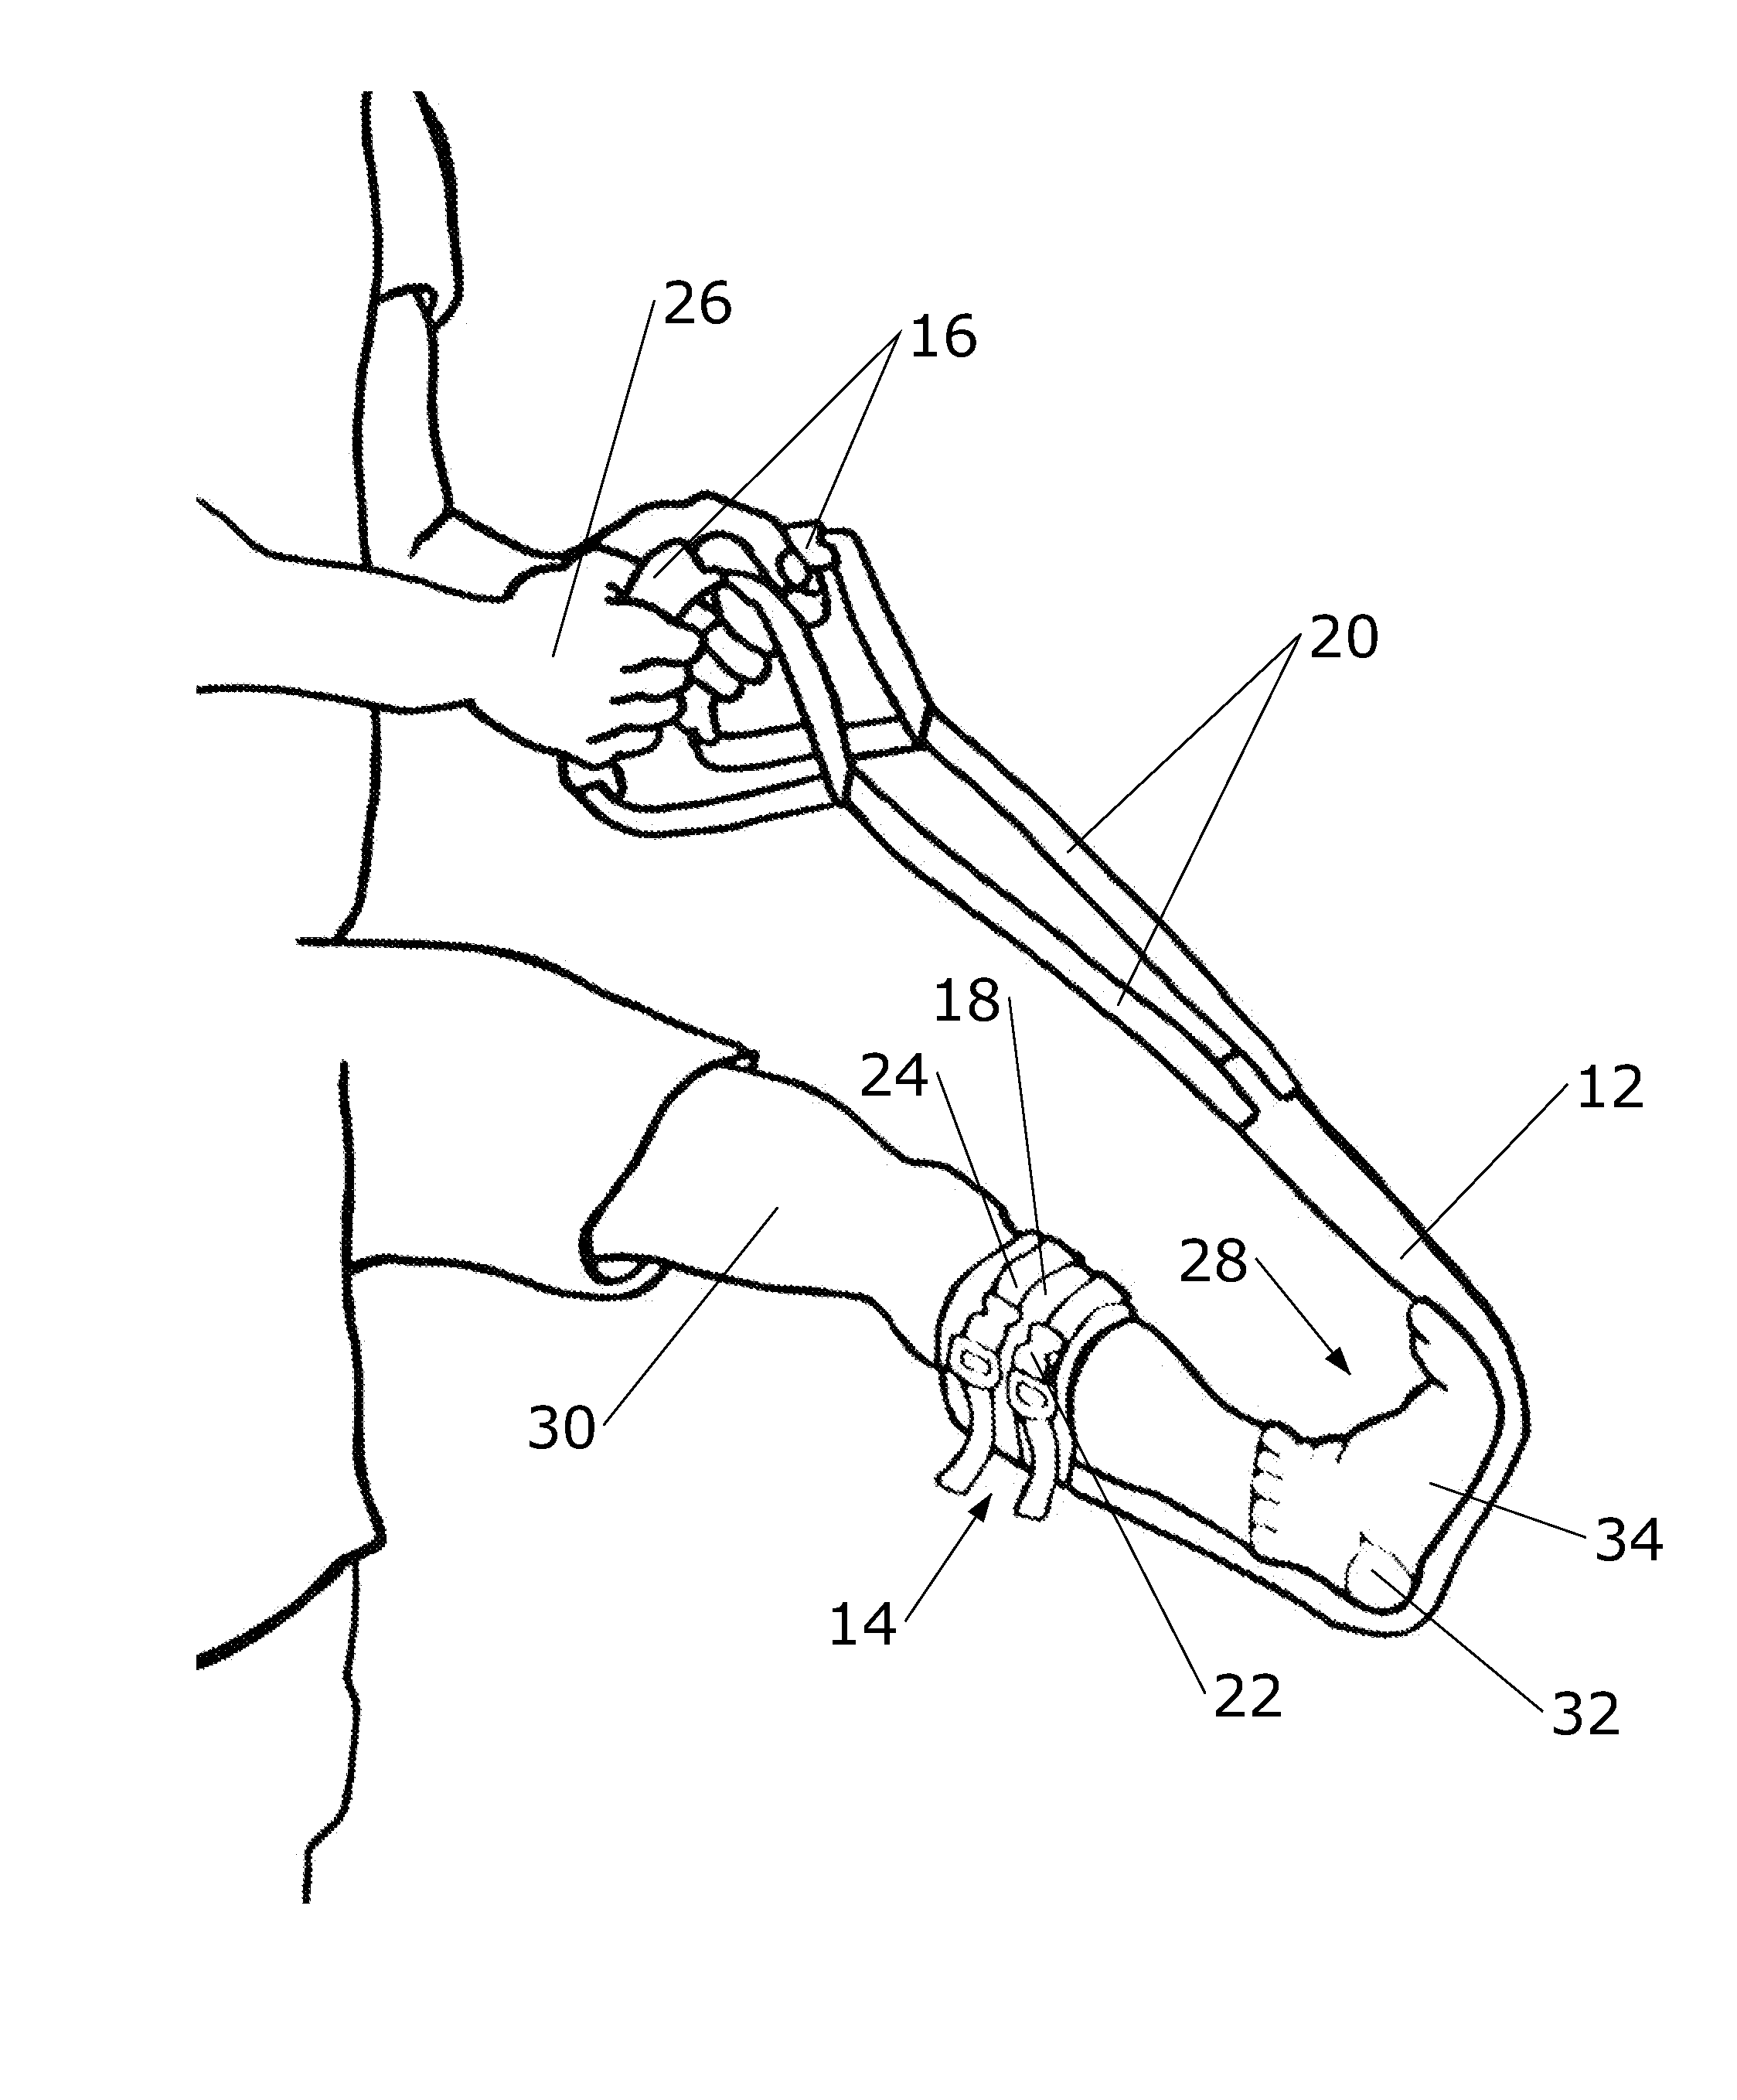 Device and Method for Passive Flexibility Training